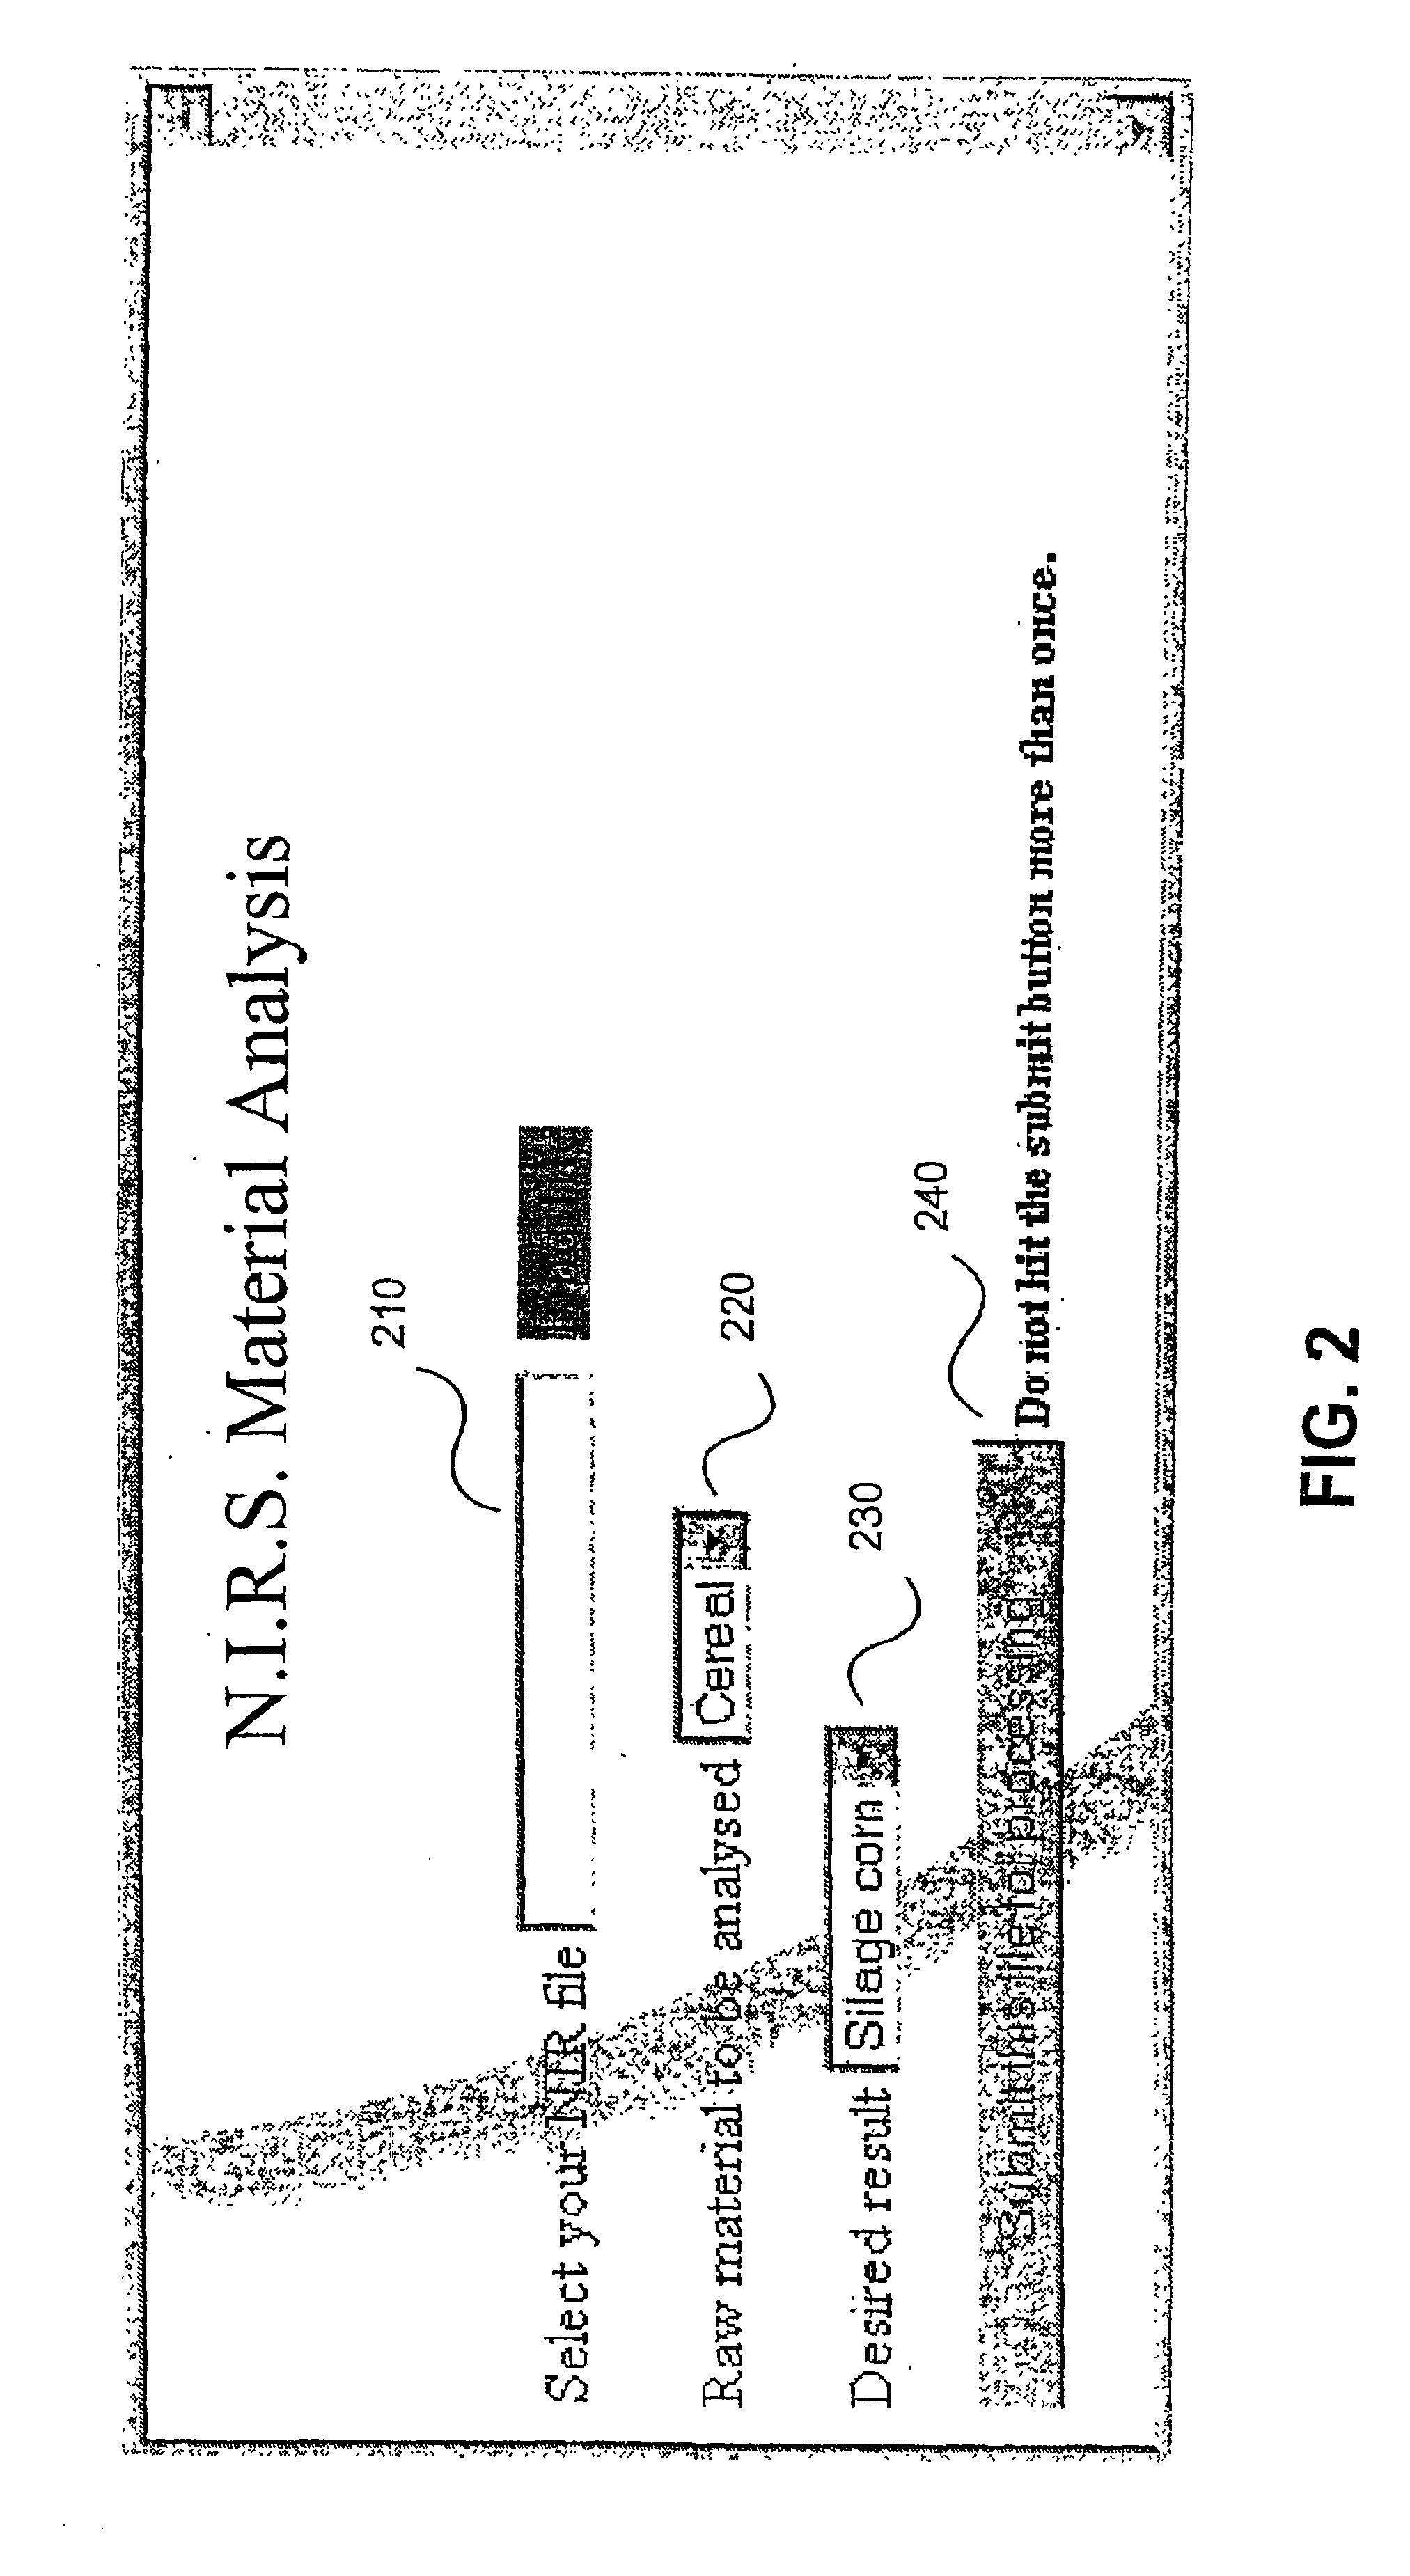 Customer-based prediction method and system using near infrared reflectance spectra of materials